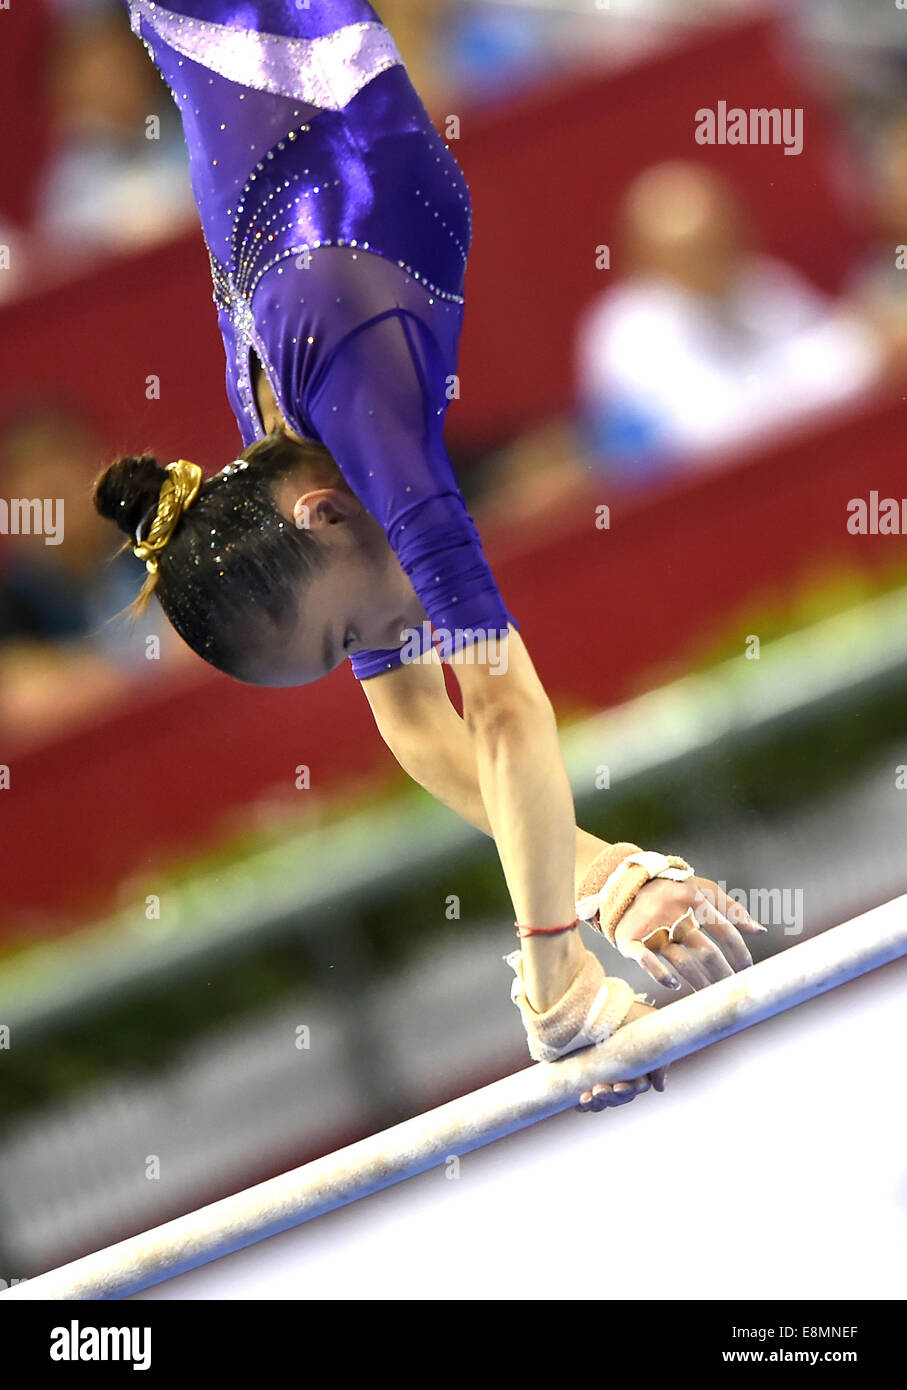 Nanning, China's Guangxi Zhuang Autonomous Region. 11th Oct, 2014. Chinese gymnast Yao Jinnan performs on the uneven bars during the women's individual apparatus finals of the 45th Gymnastics World Championships in Nanning, capital of south China's Guangxi Zhuang Autonomous Region, Oct. 11, 2014. Yao Jinnan won the gold medal in the women's uneven bars final with 15.633 points. Credit:  Xiao Yijiu/Xinhua/Alamy Live News Stock Photo